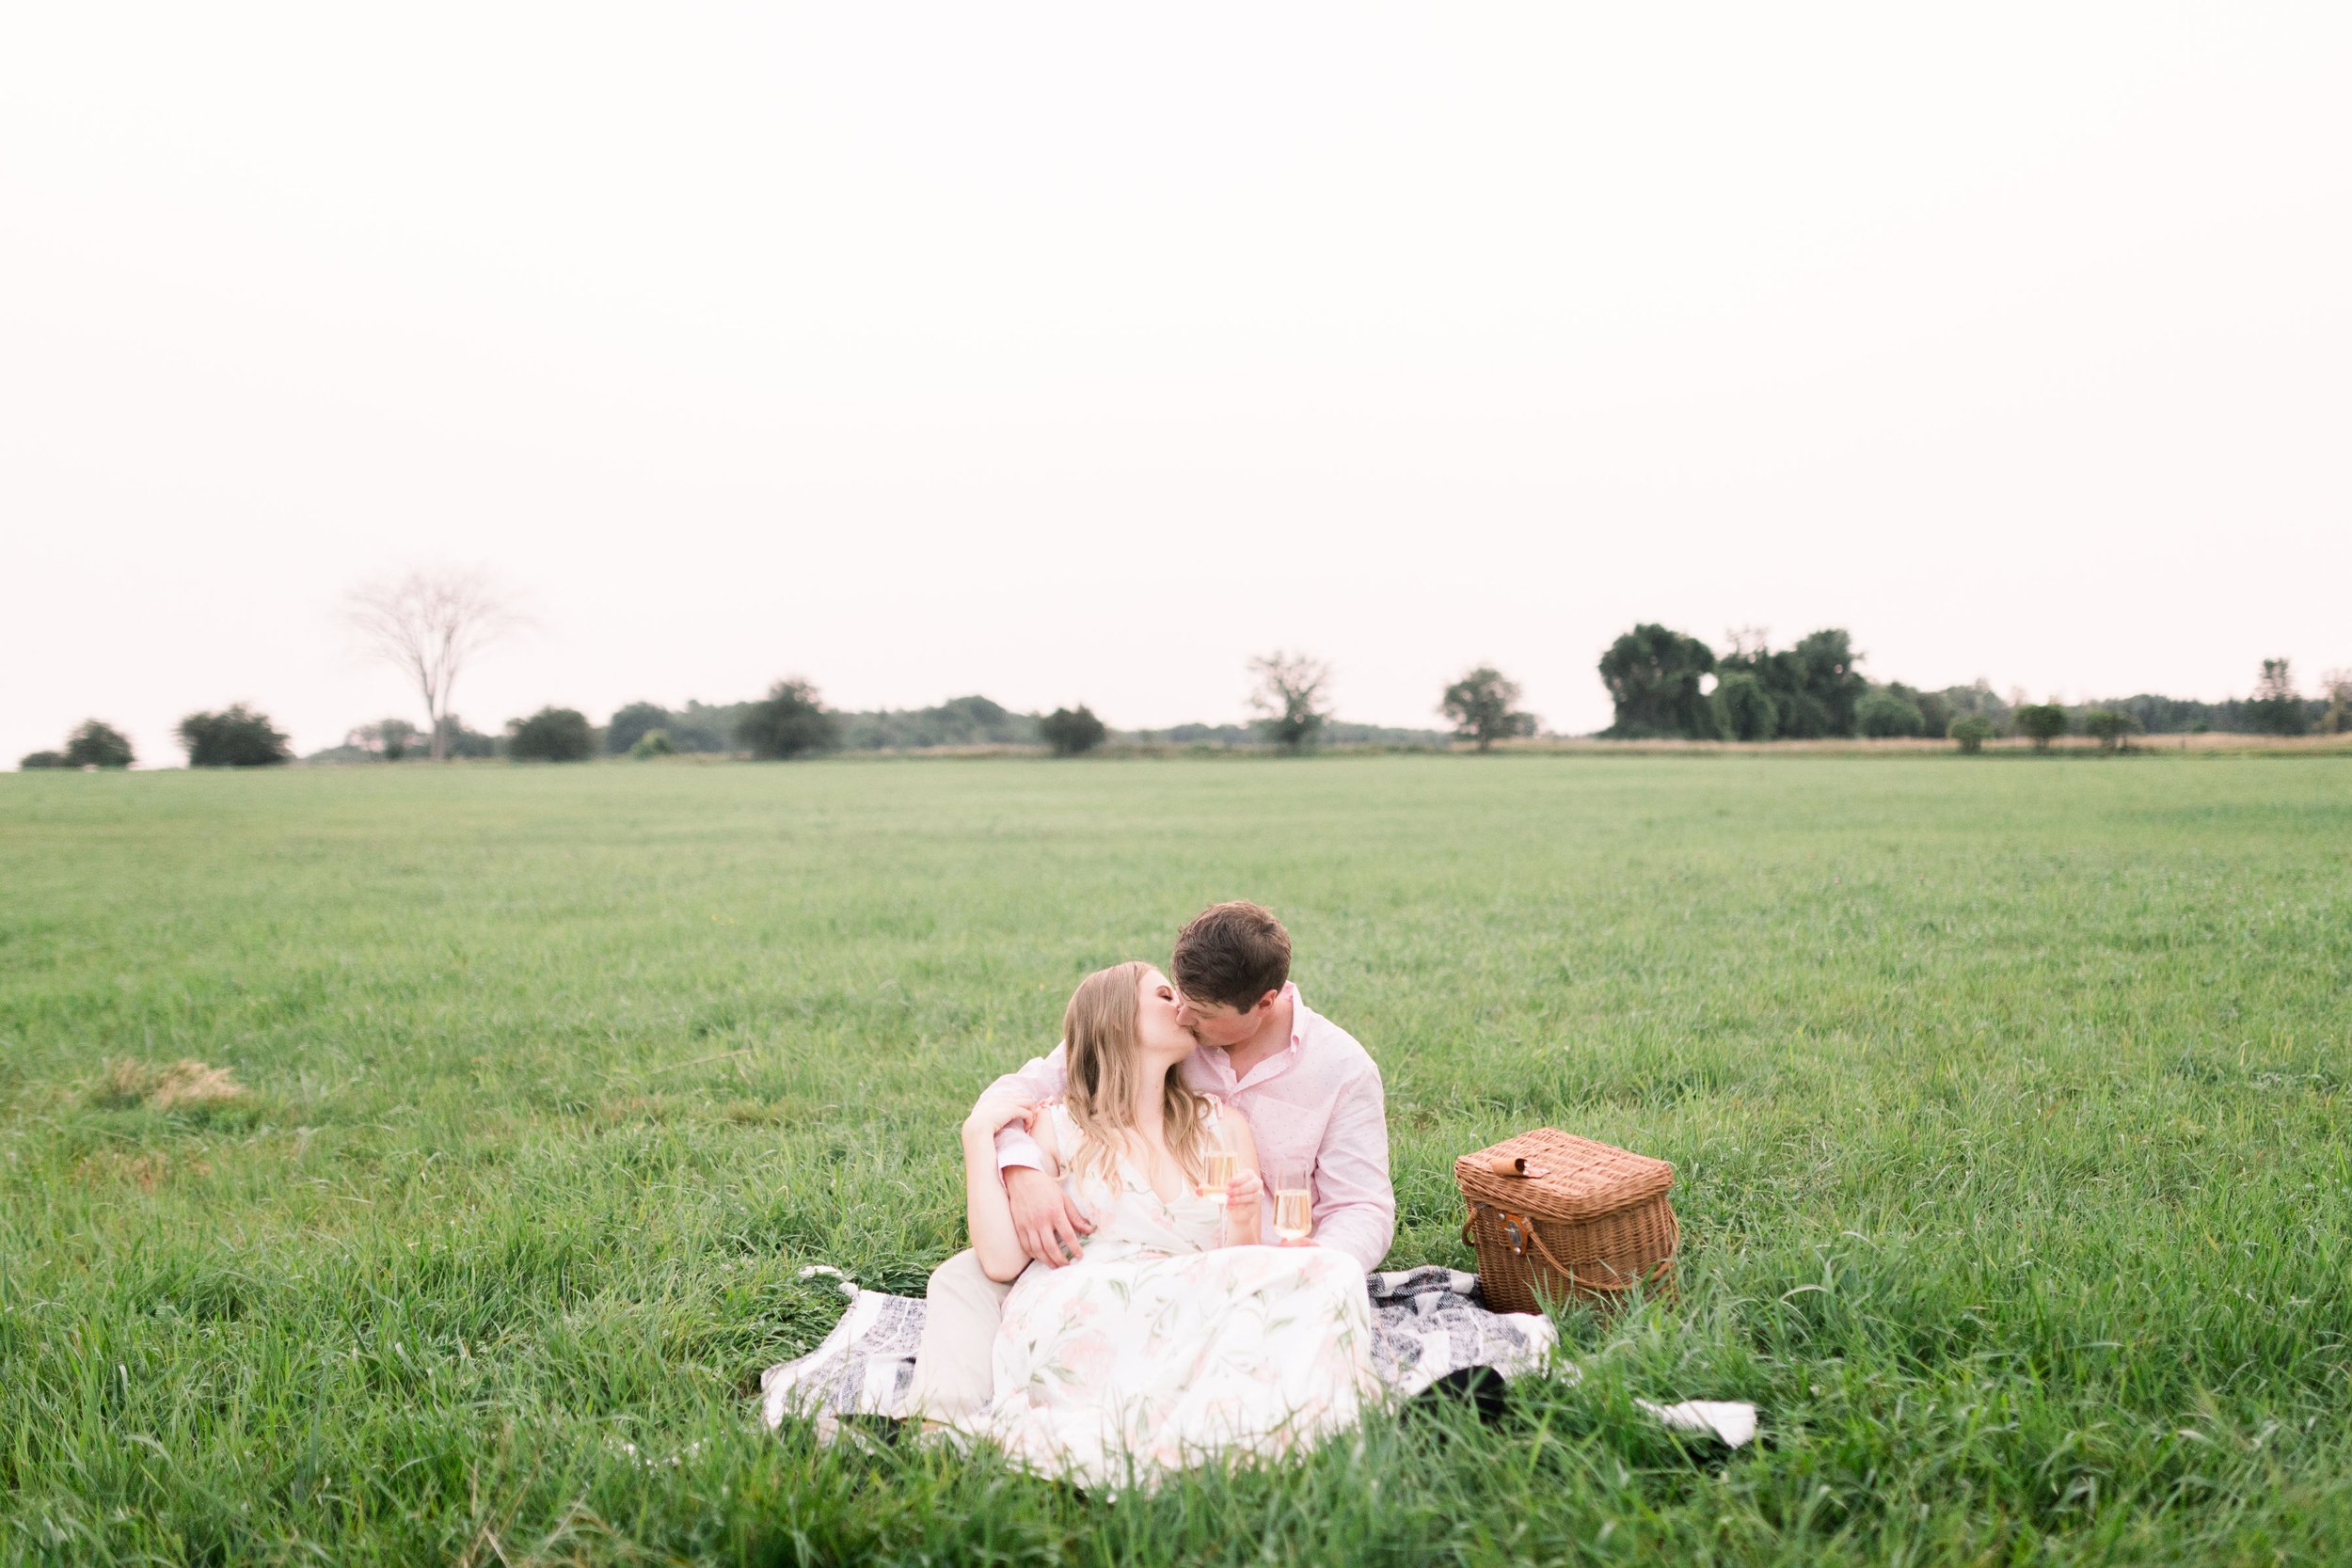  Chelsea Mason Photography captures soon-to-be newlyweds kissing on a picnic blanket in the springtime. Spring picnic engagement photography #ChelseaMasonPhotography #ChelseaMasonEngagements #PinheysPointEngagements #OttawaEngagementPhotography 